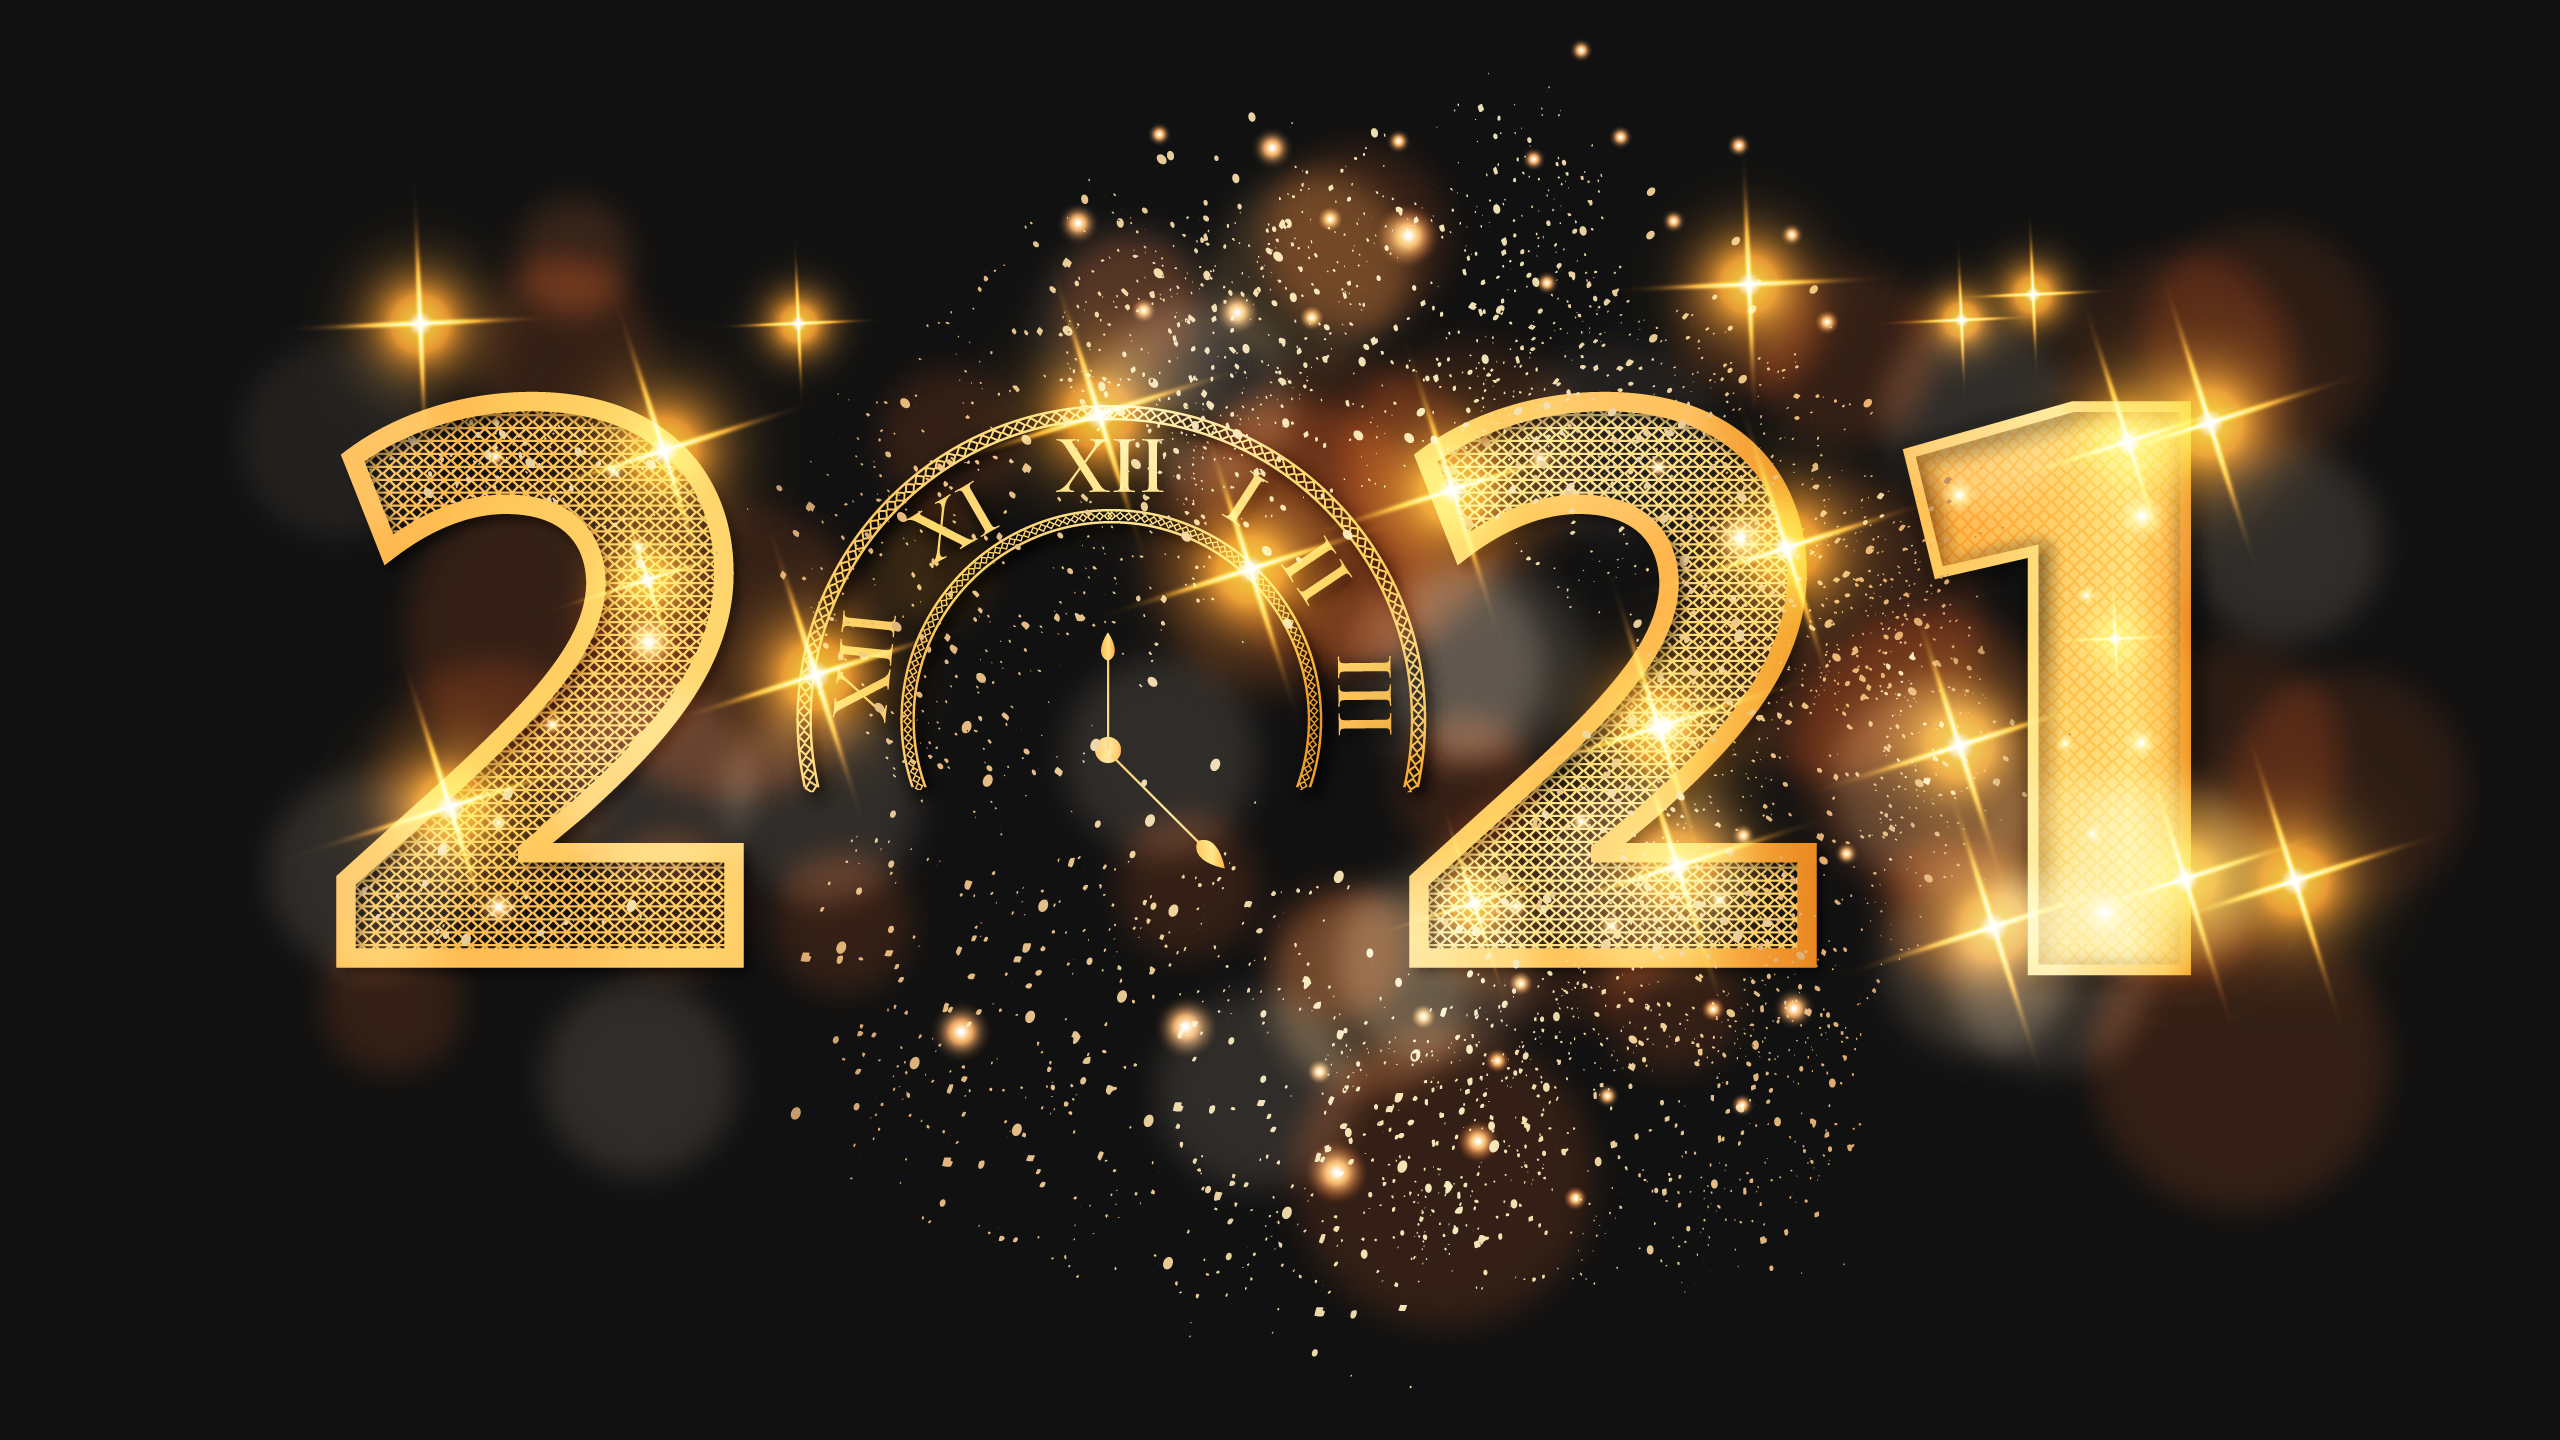 New Year 4K Wallpaper, Happy New Year, Golden Letters, Dark Background, Sparkles, Celebrations New Year